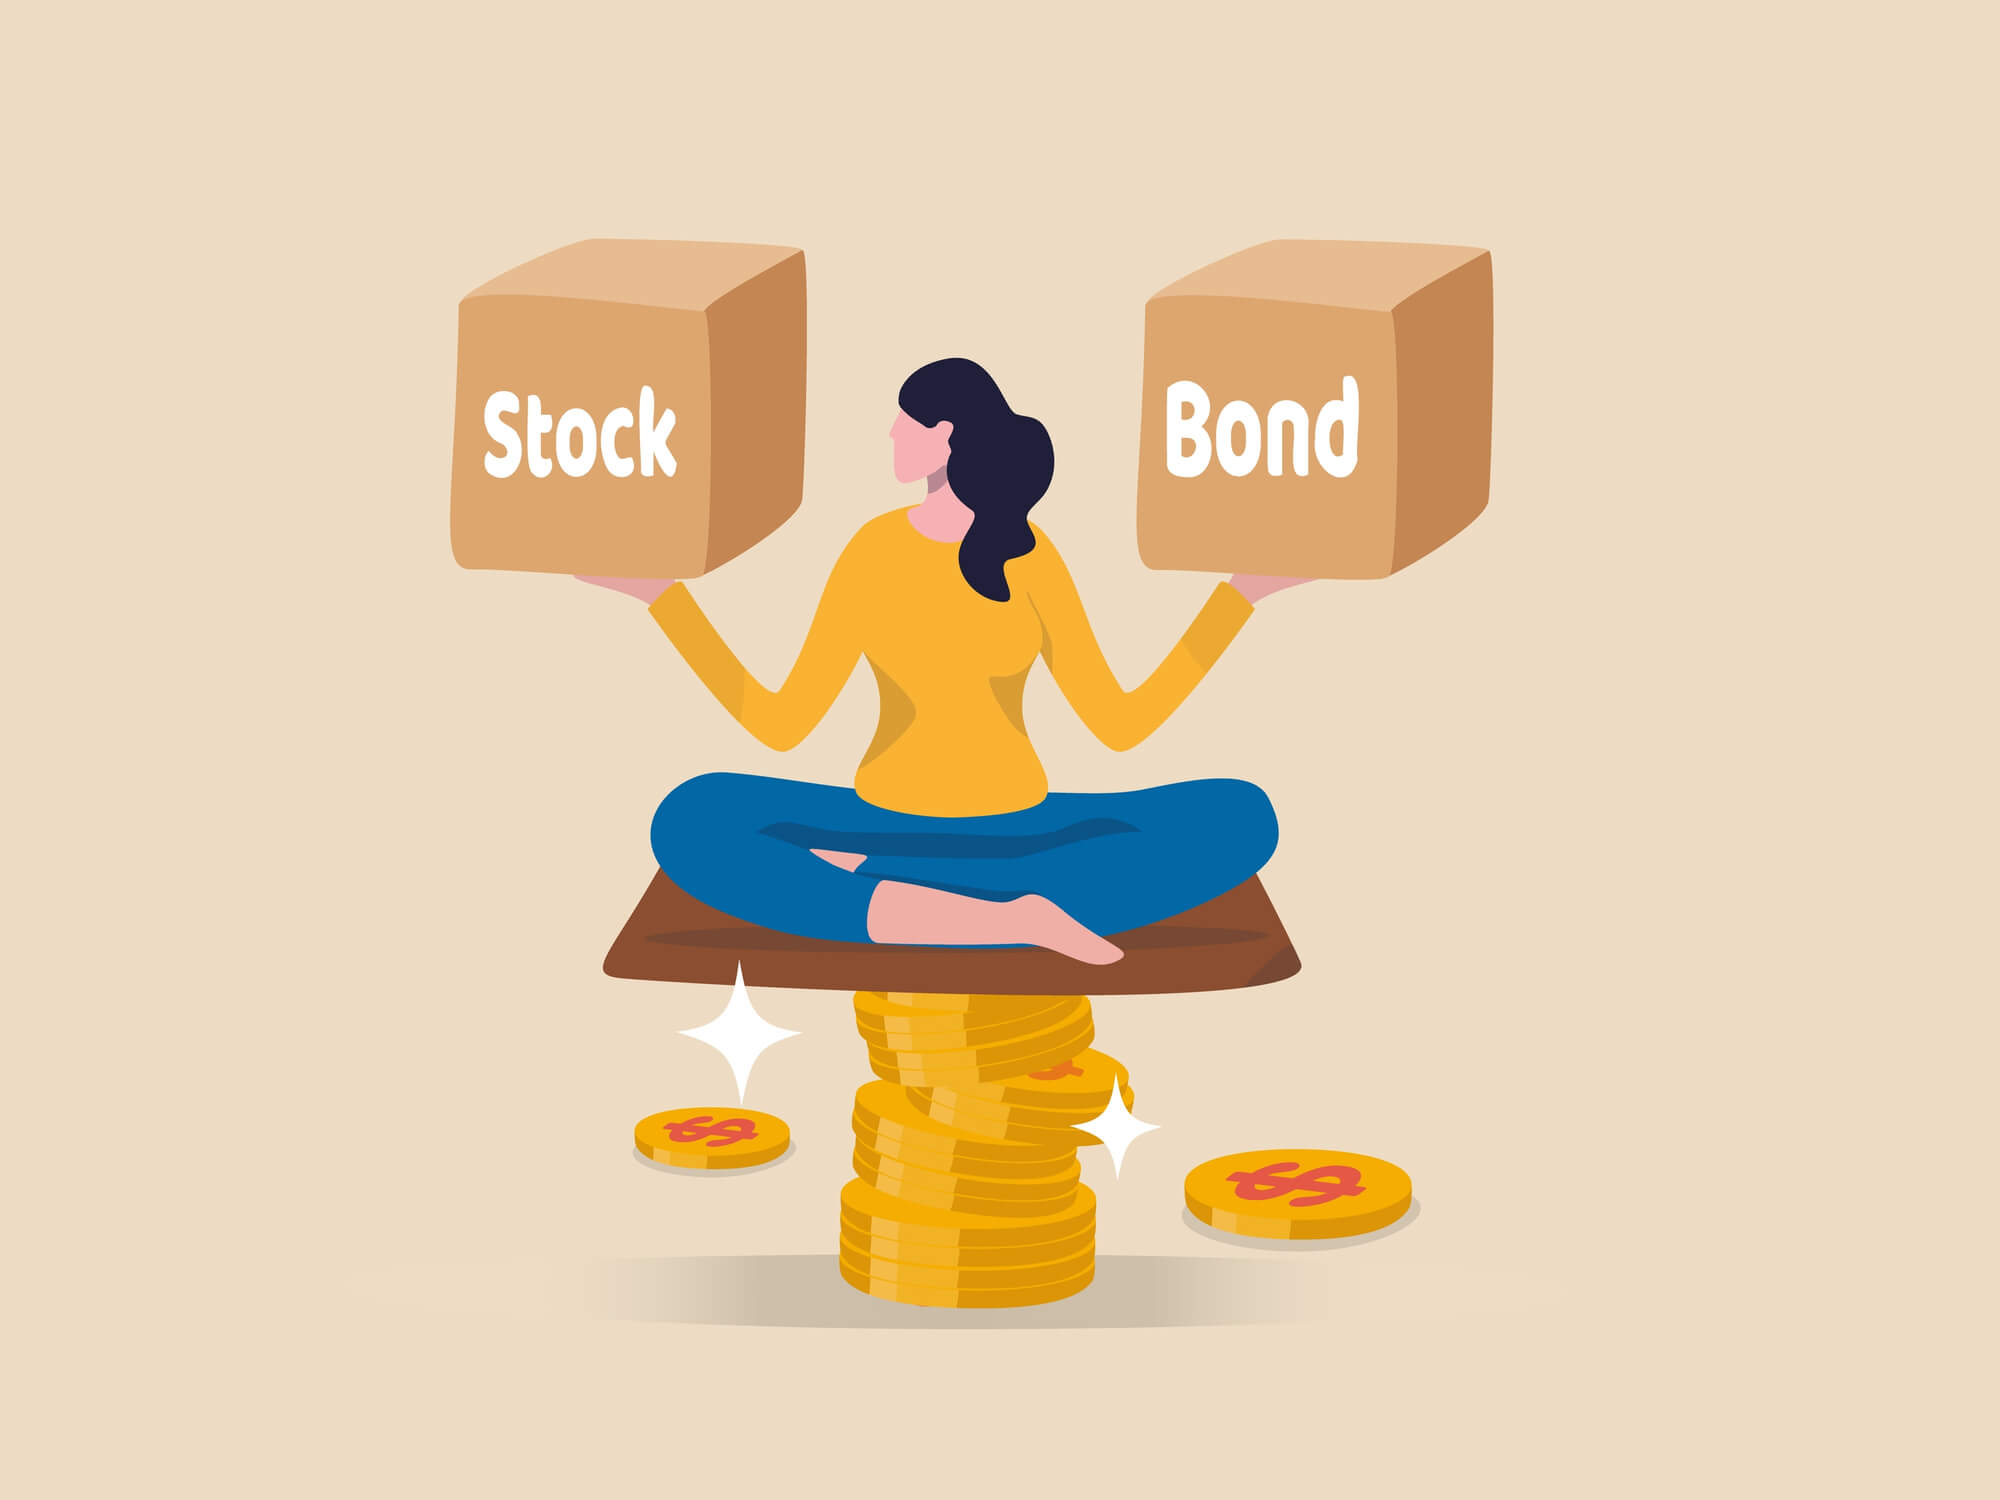 Are You A Stock Or A Bond? - Understanding Stocks, Bonds, And Human Capital